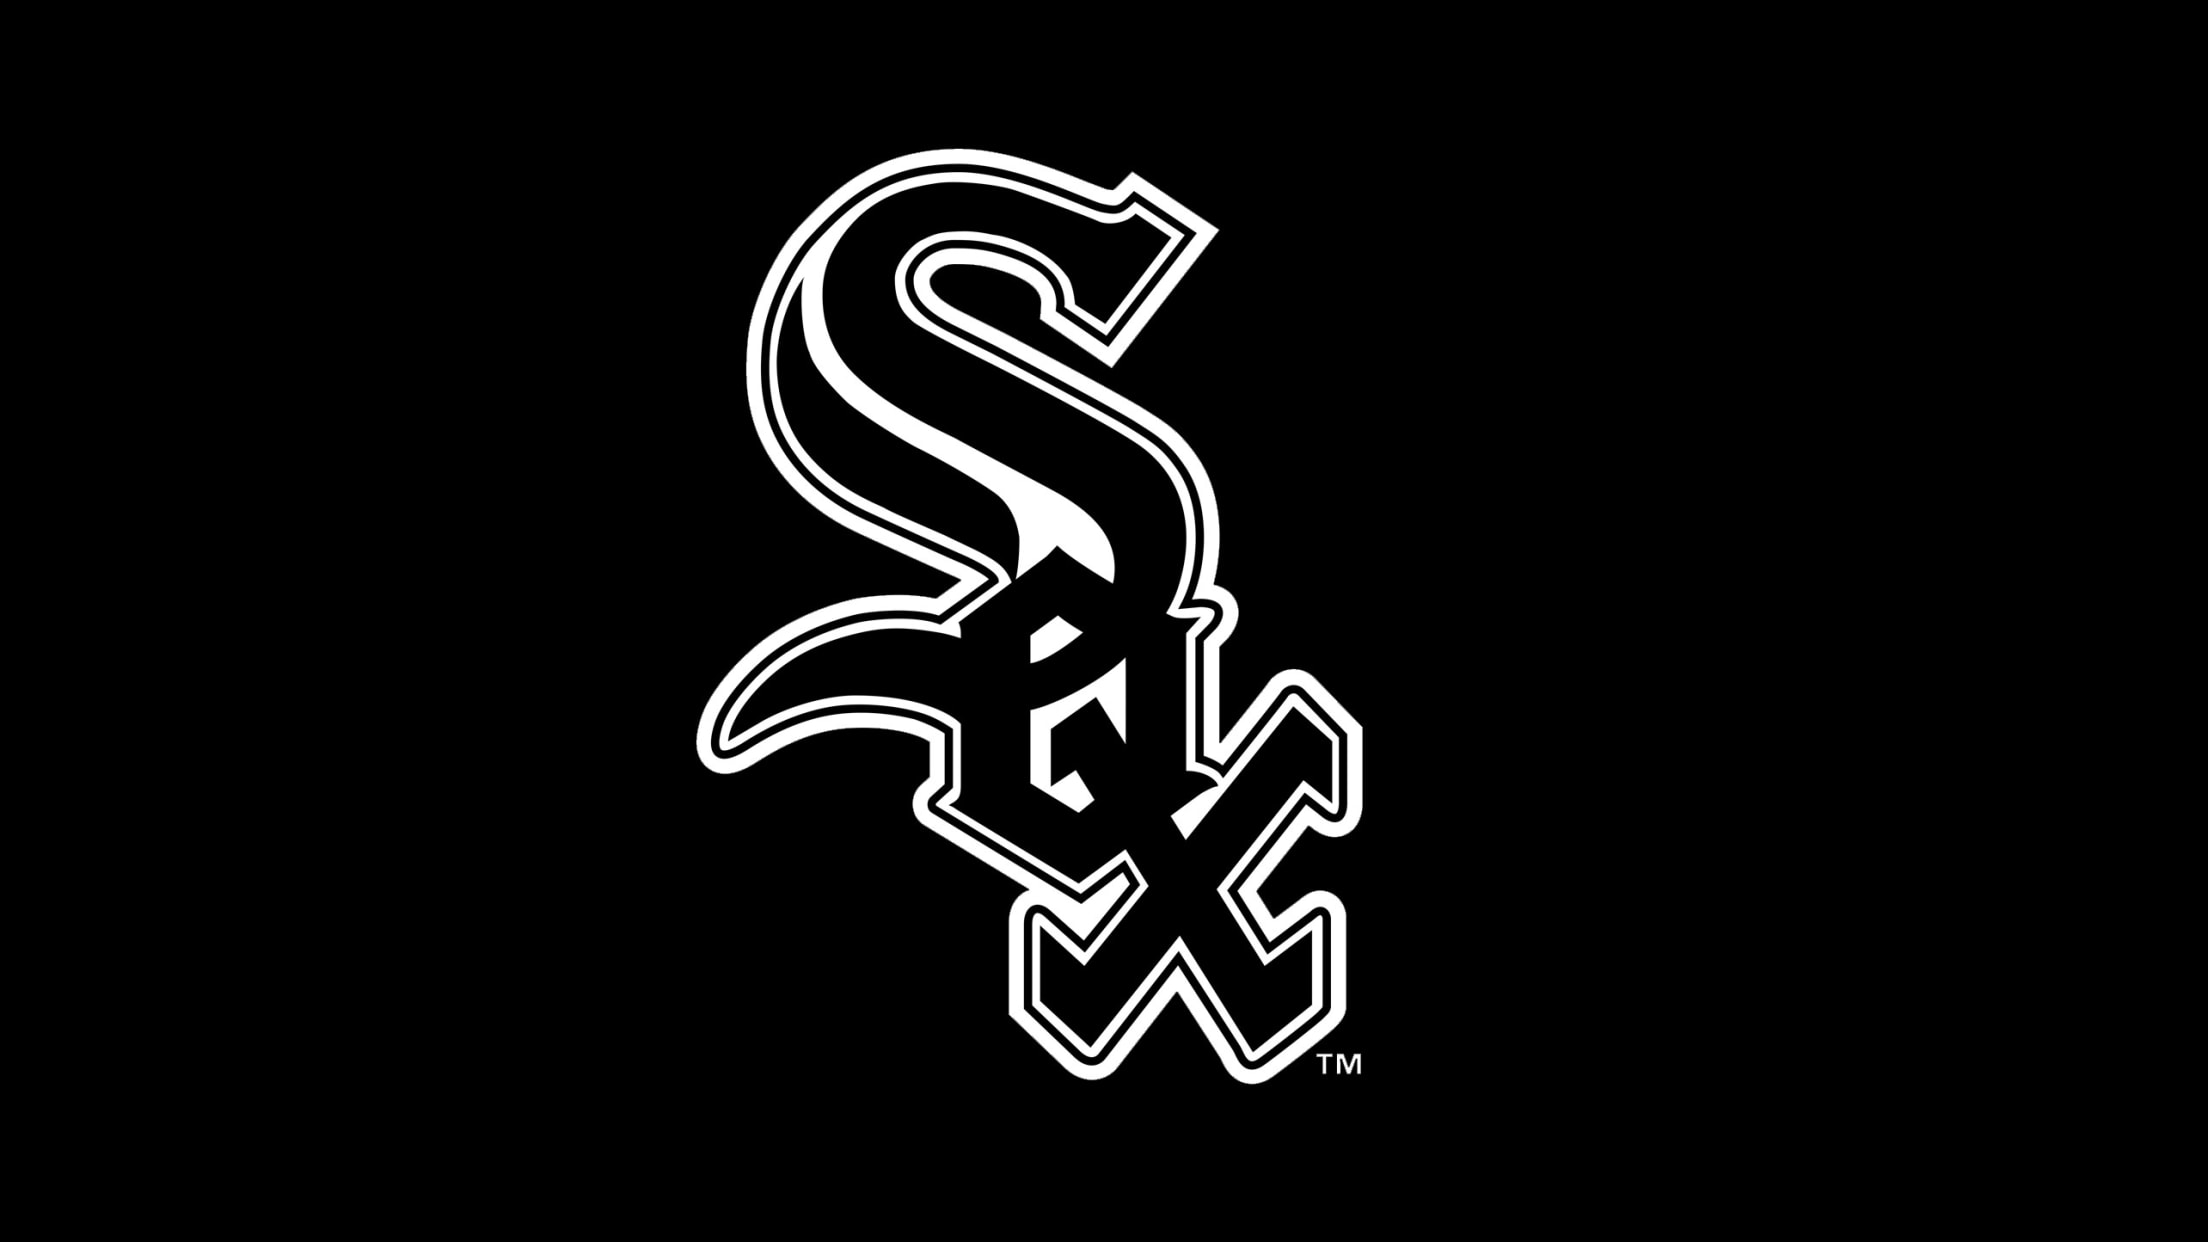 White Sox Wallpapers & Downloads